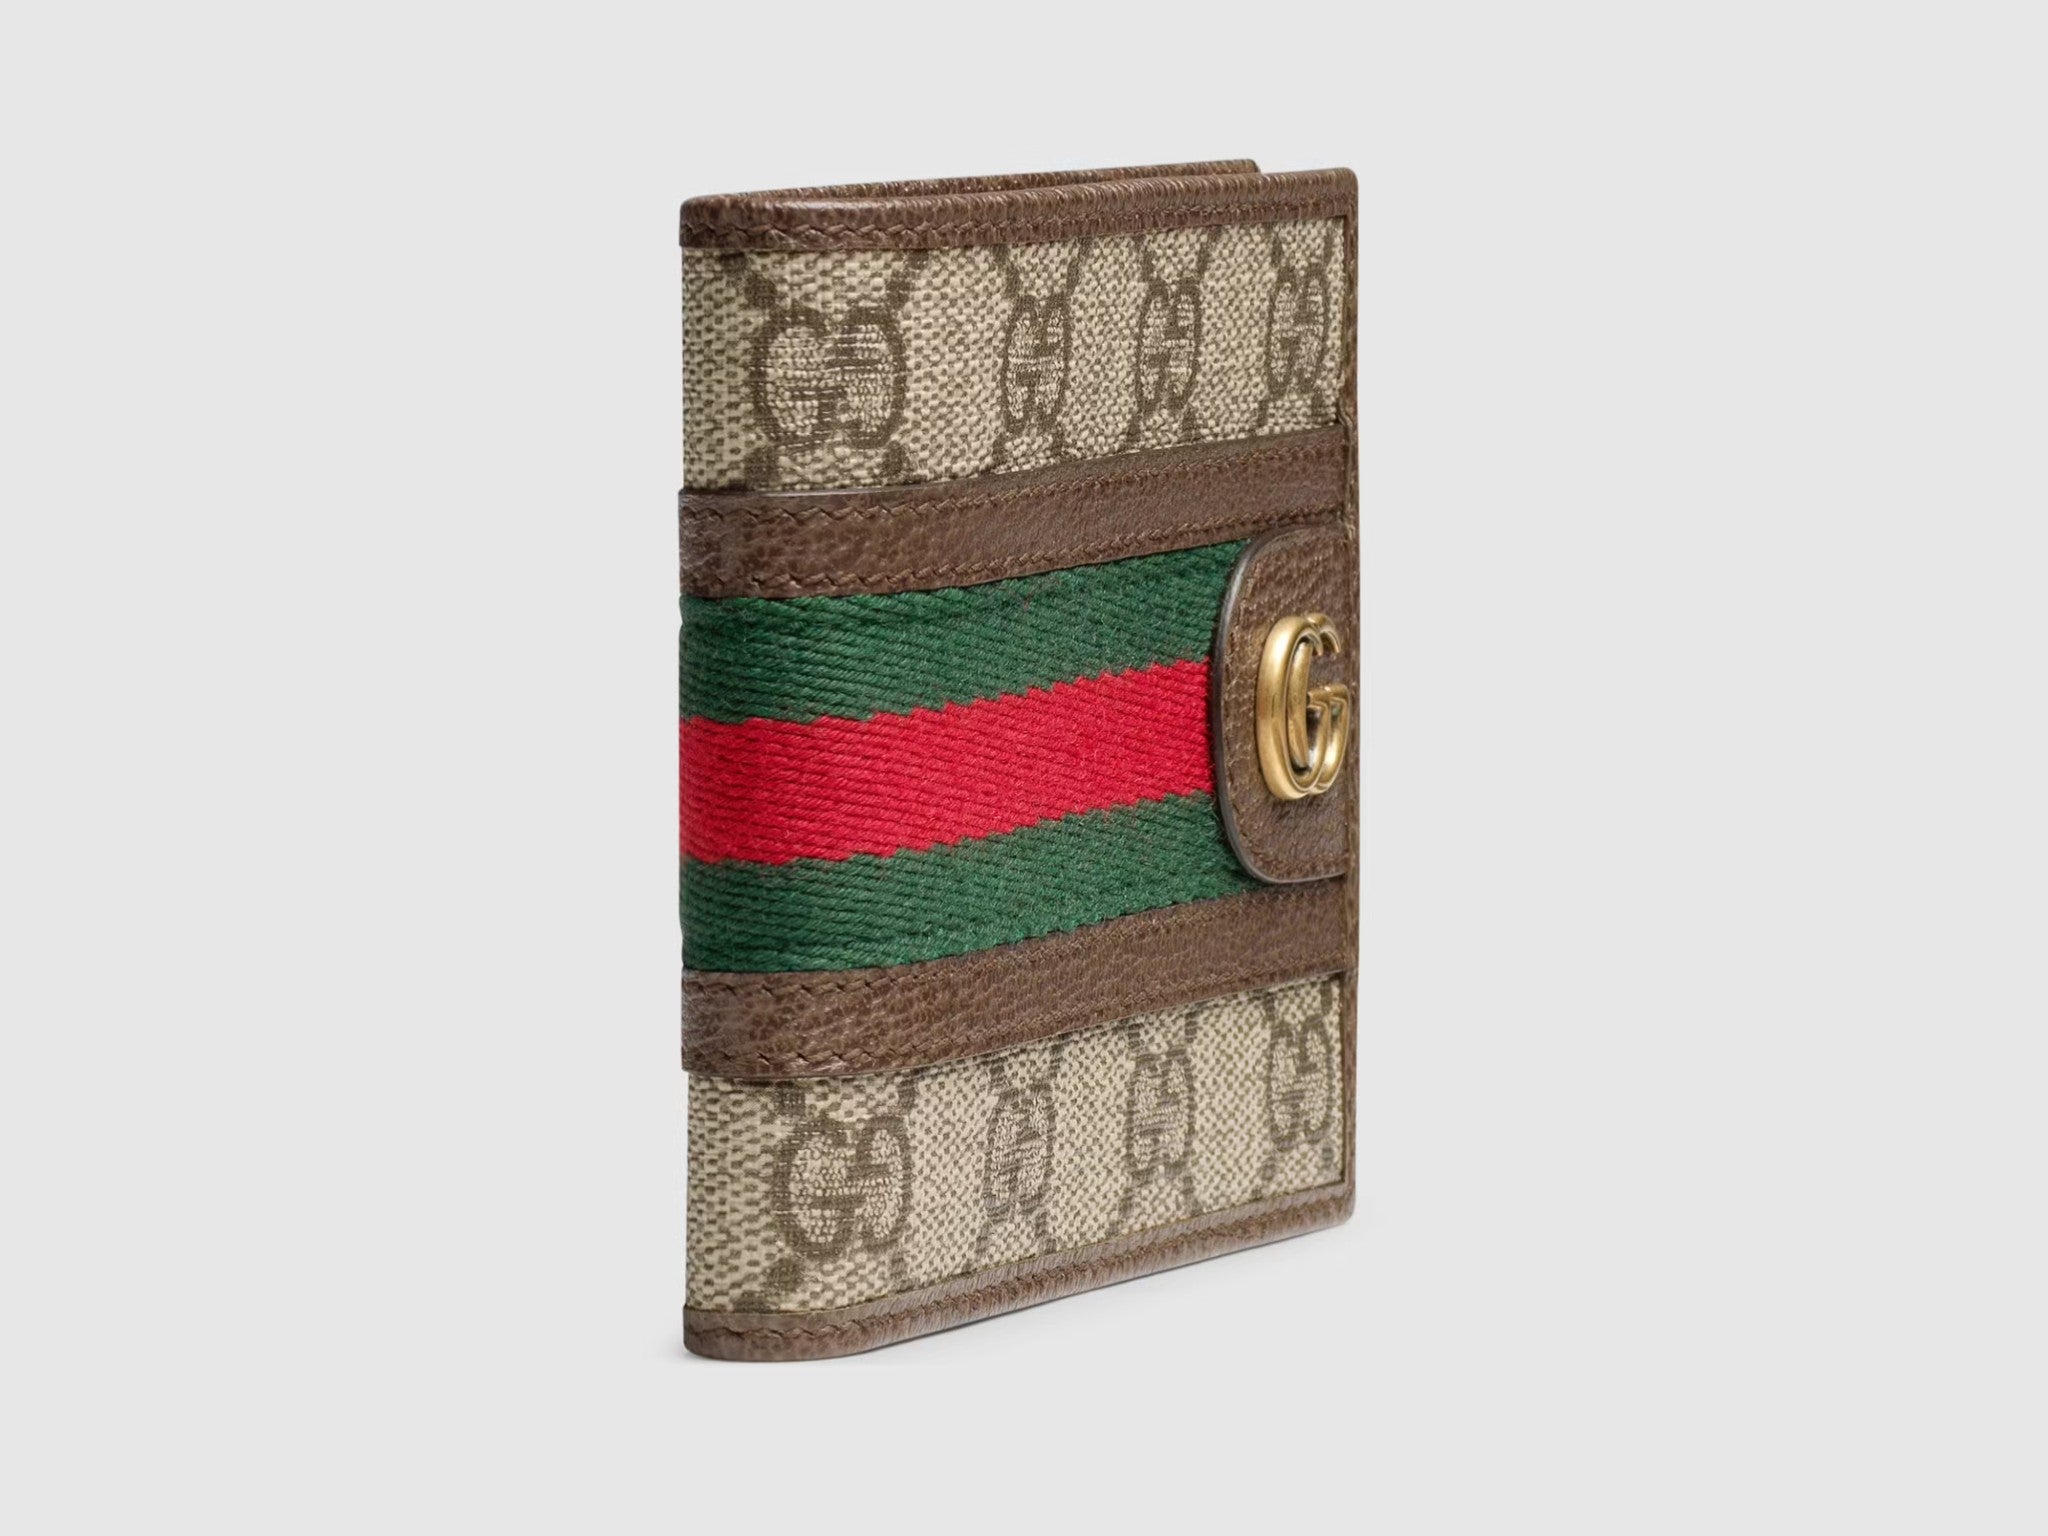 Gucci ophidia GG wallet indybest.jpeg